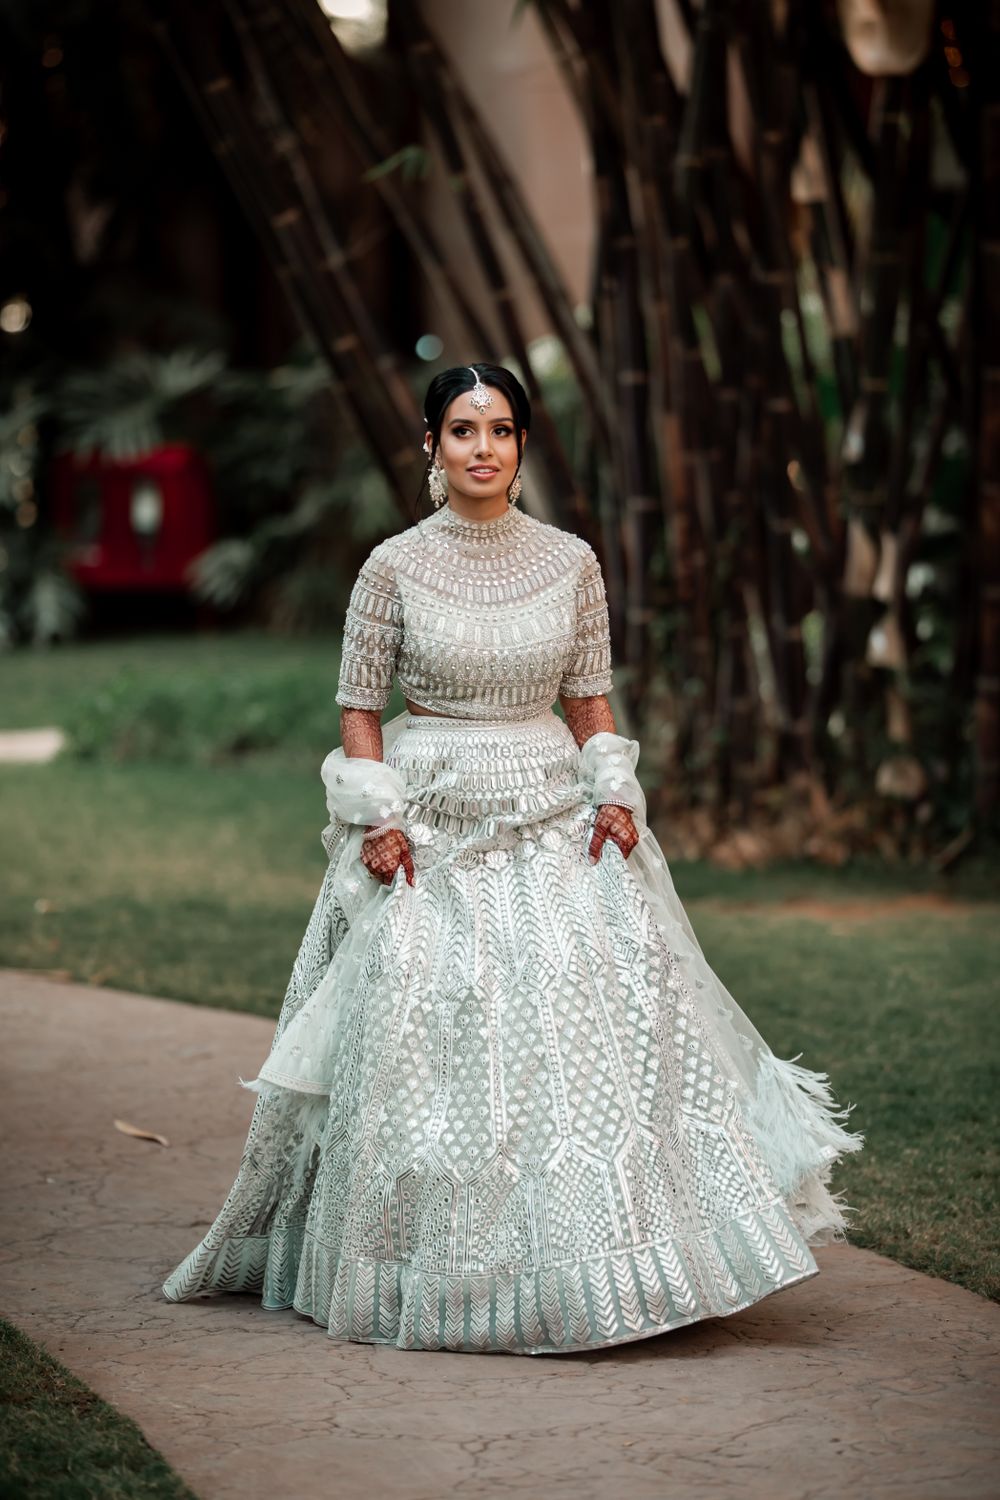 Photo of Bride wearing a silver lehenga on engagement.